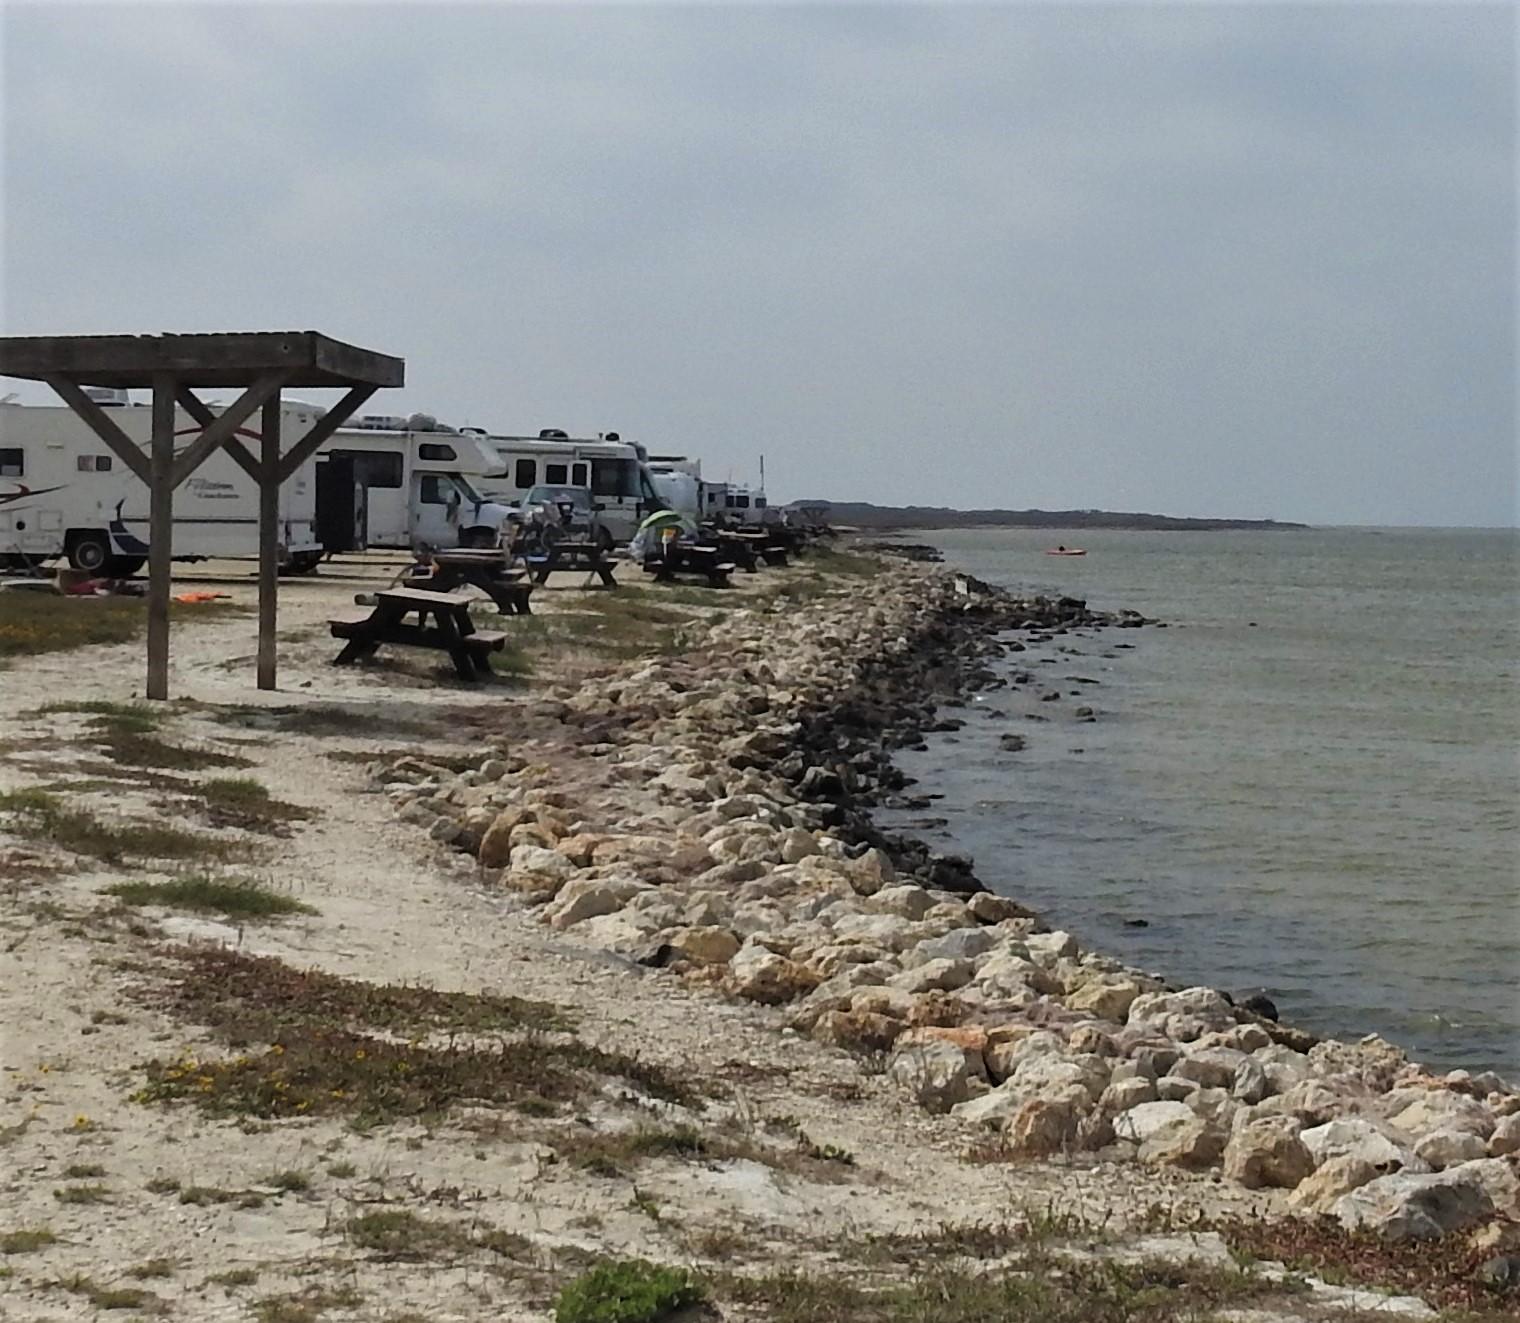 camping vehicles in side by side sites facing Laguna Madre